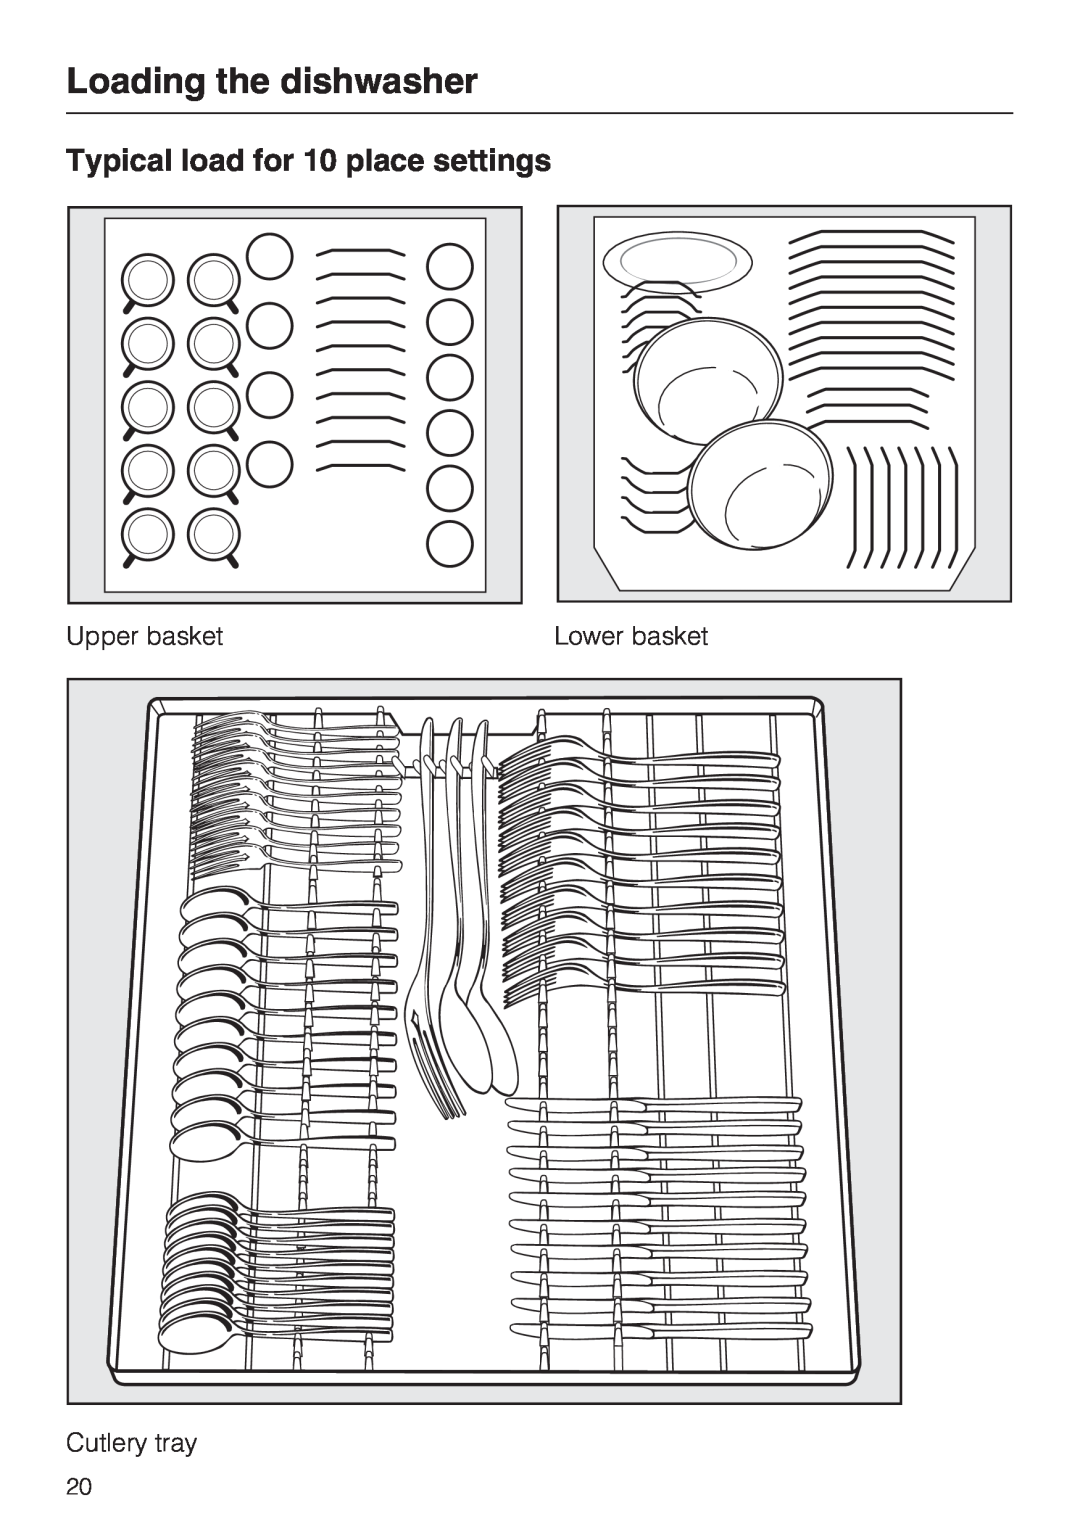 Miele G 5175, G 5170 Typical load for 10 place settings, Loading the dishwasher, Upper basket, Lower basket, Cutlery tray 